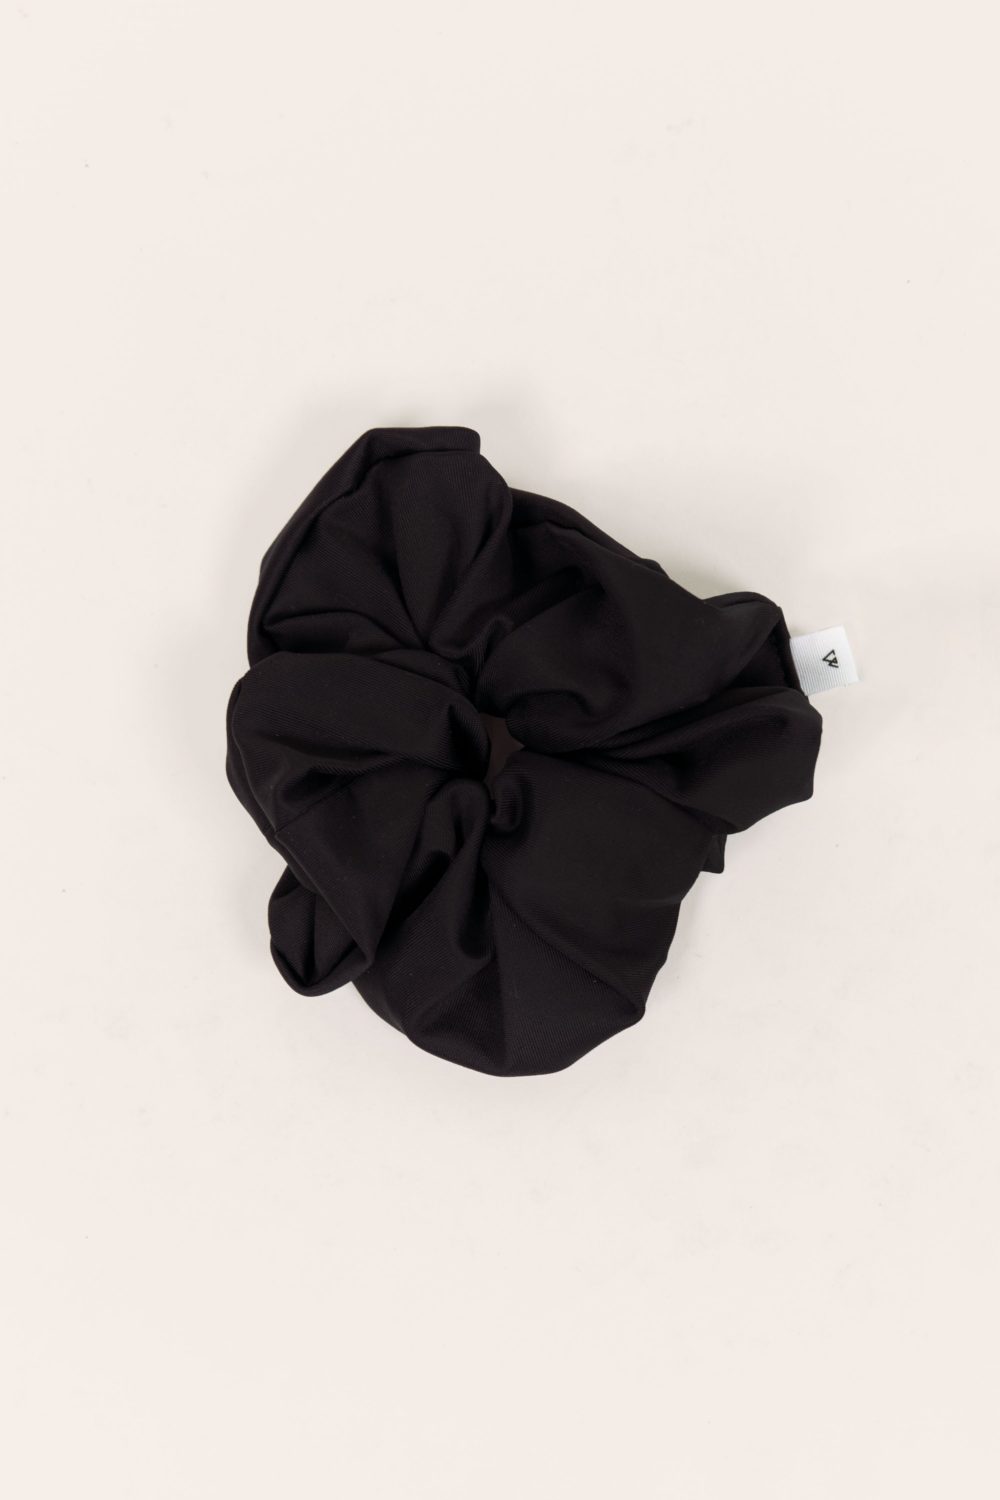 Rbn Scrunchies 9V2 Eco Friendly Products